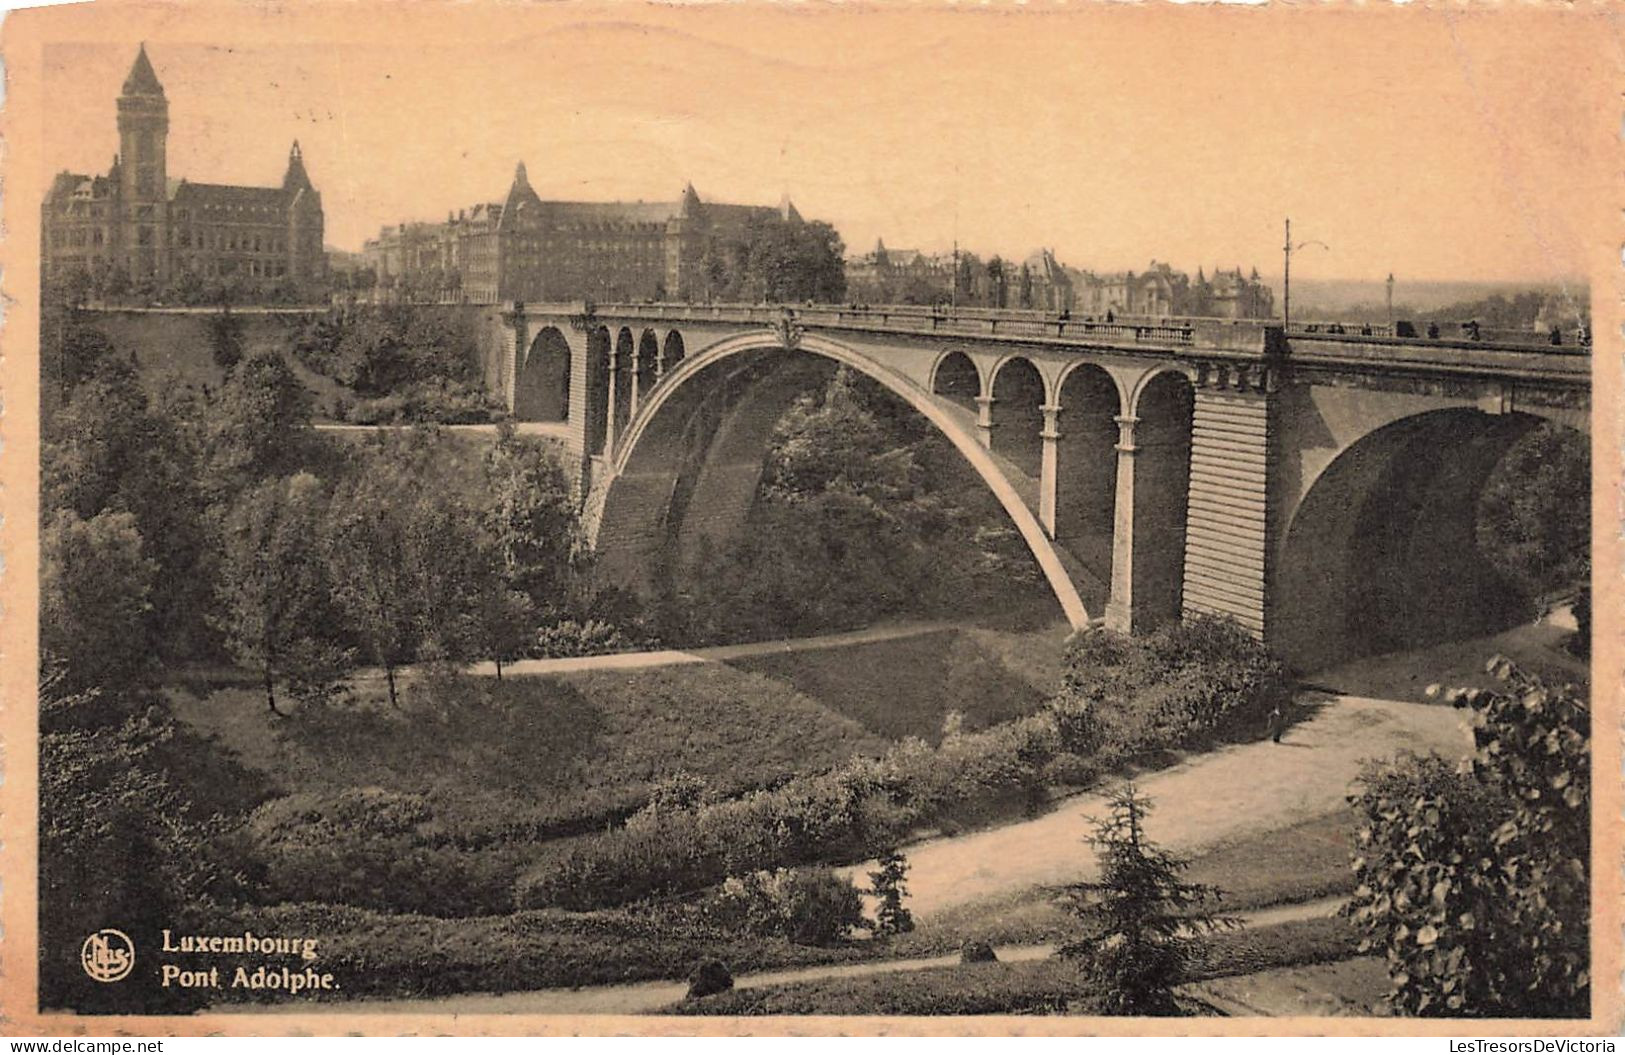 LUXEMBOURG - Luxembourg Ville - Pont Adolphe - Carte Postale Ancienne - Lussemburgo - Città